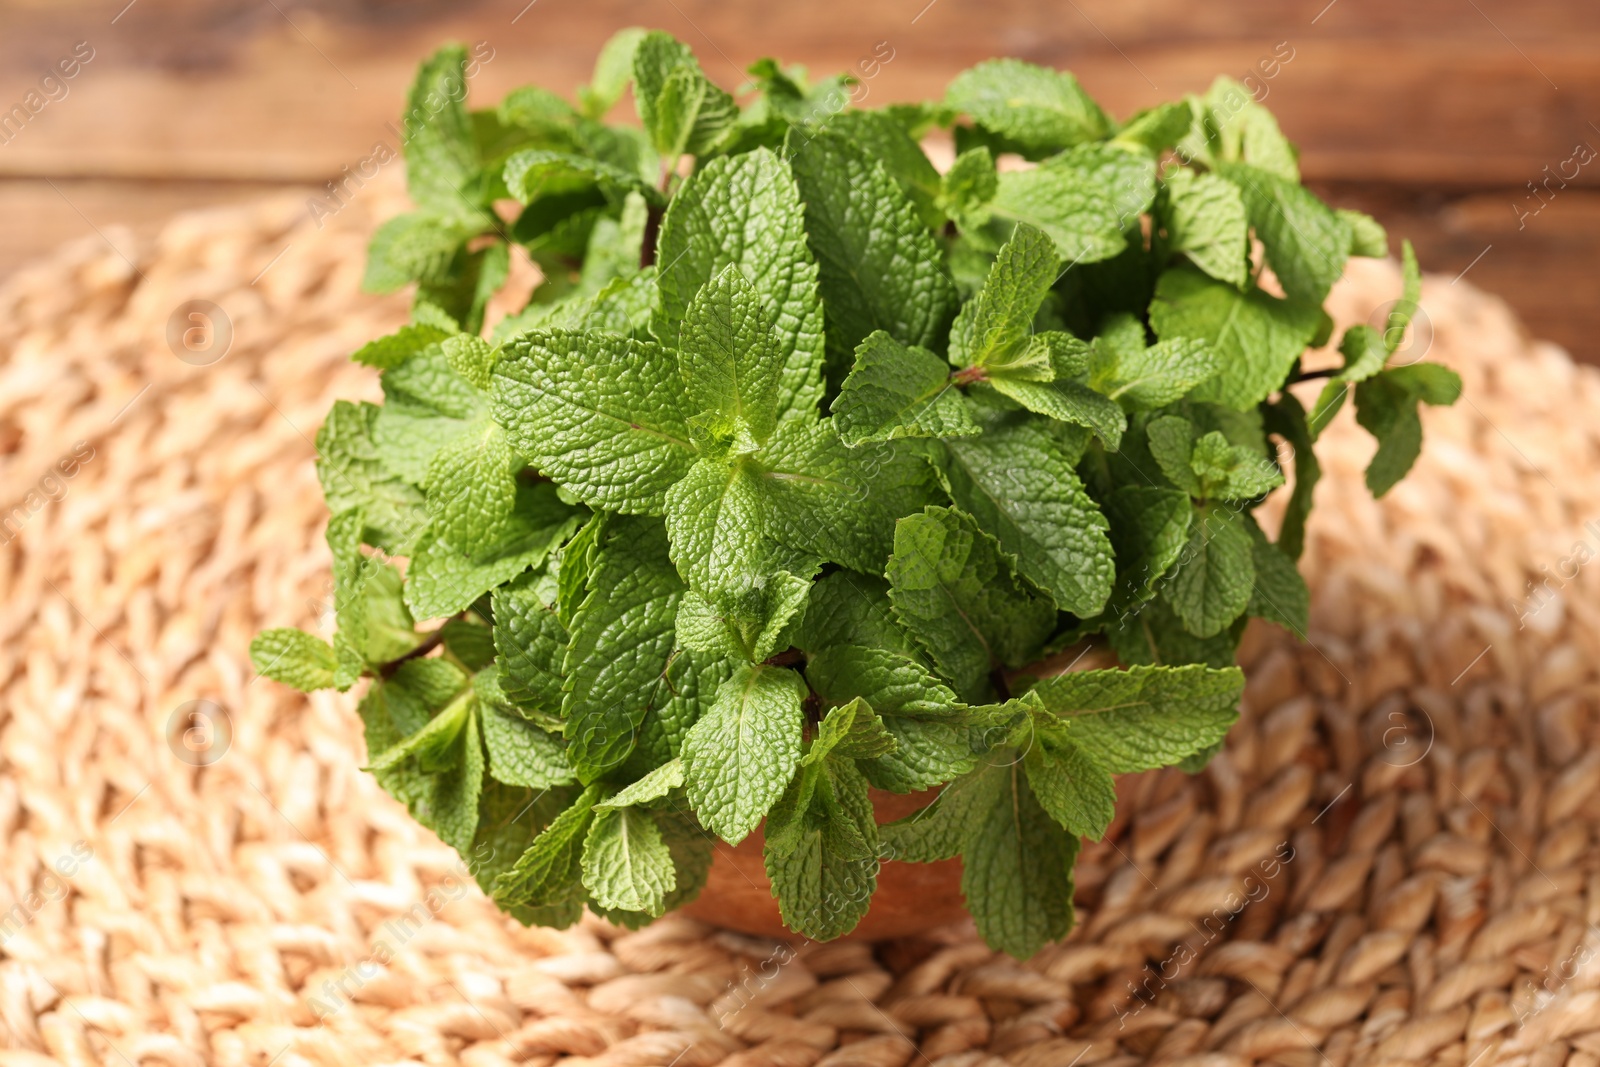 Photo of Bowl with fresh green mint leaves on wicker mat, closeup